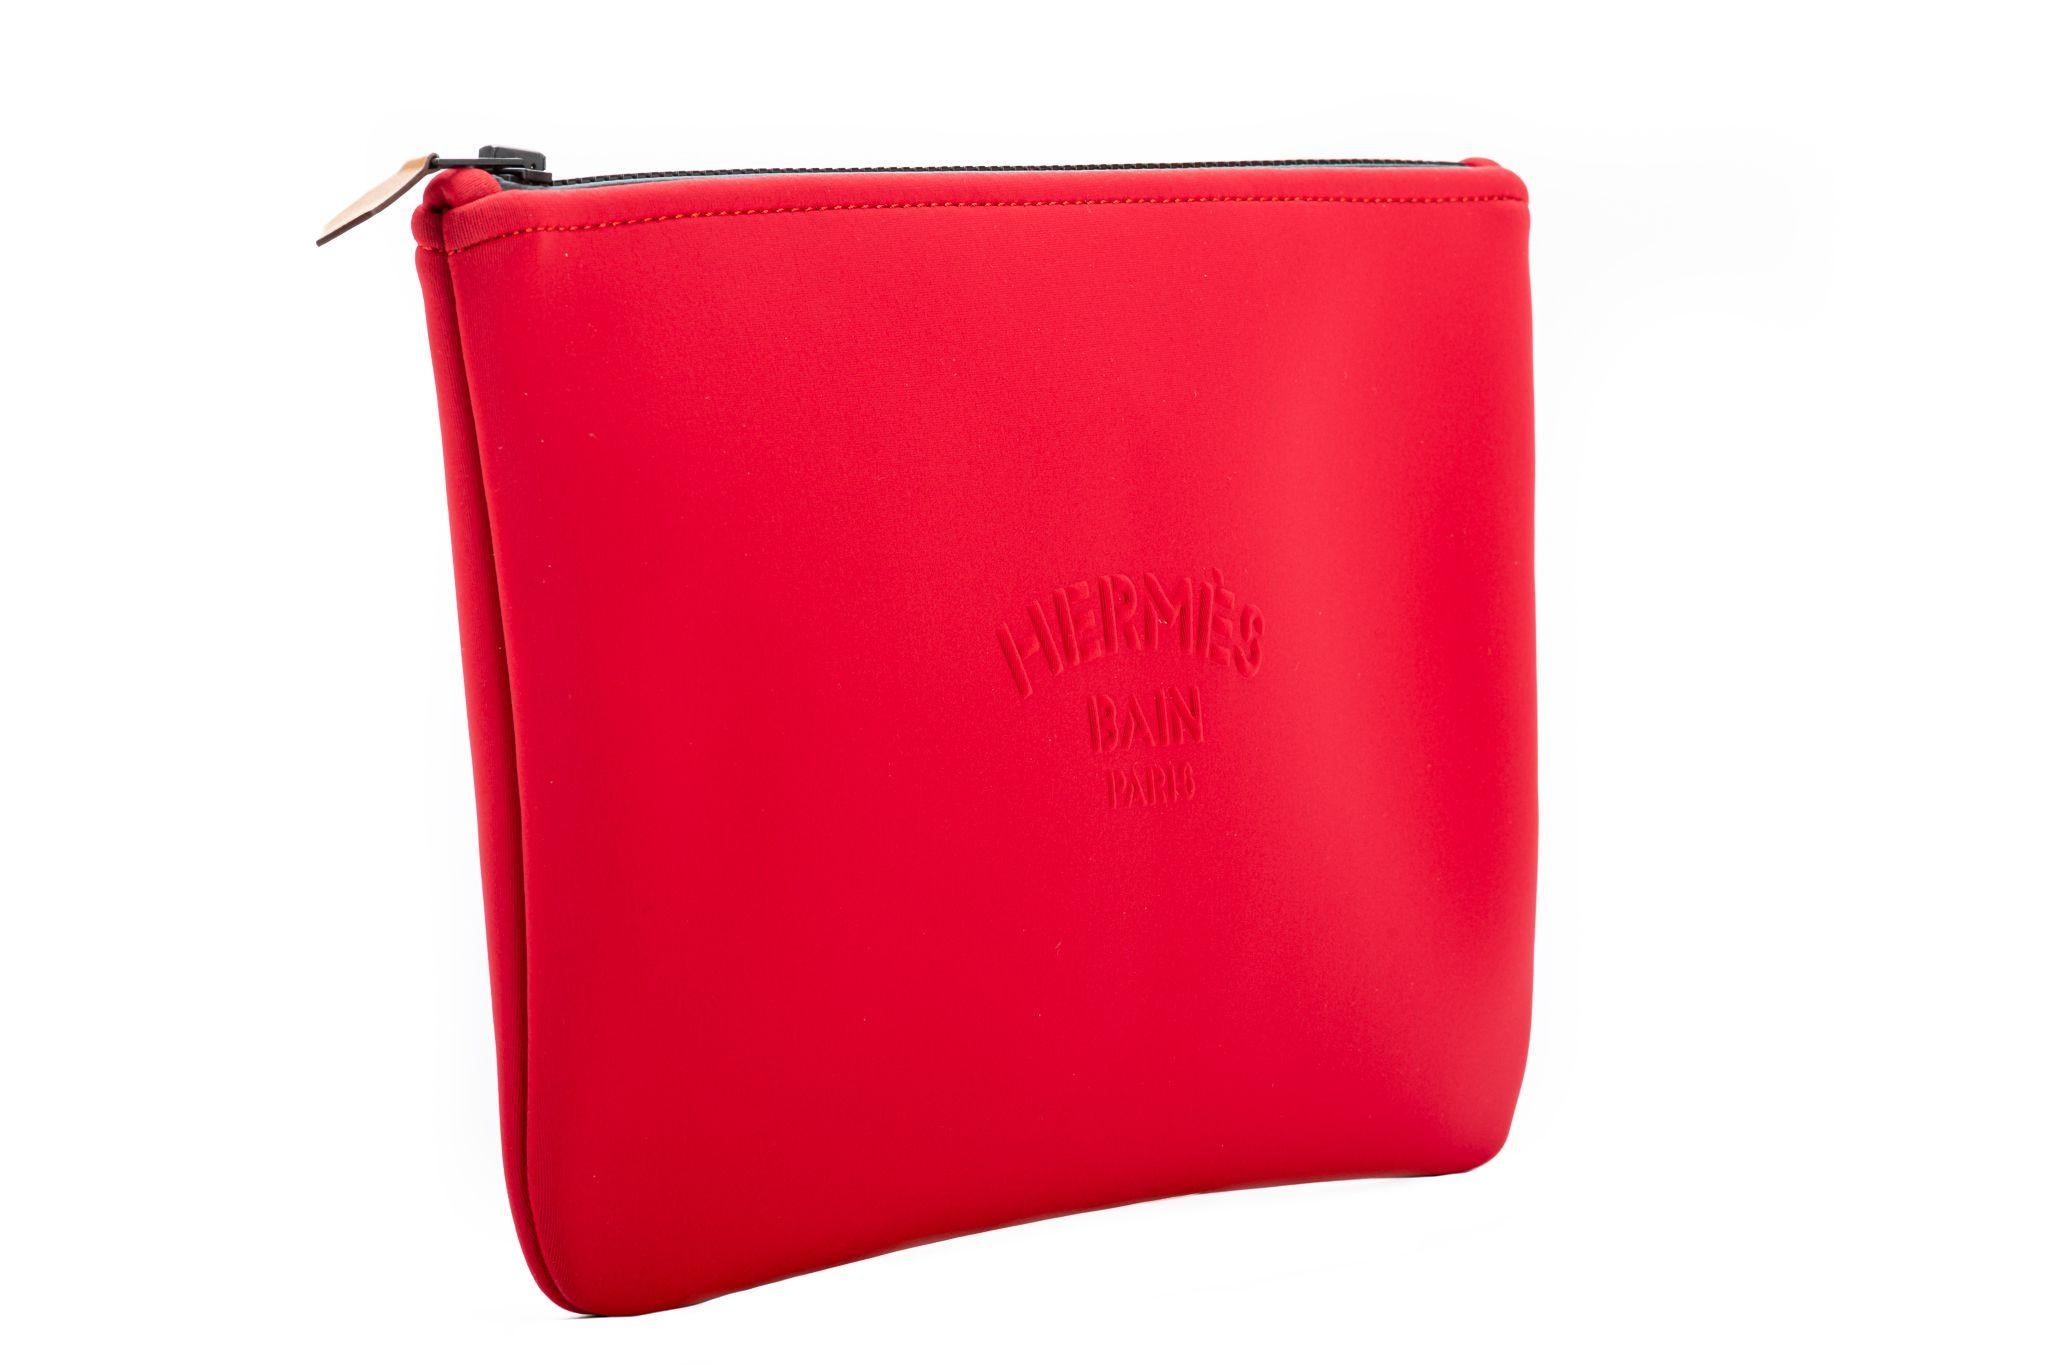 Hermès new coral red neoprene pochette/toiletry bag. comes with hermes shopping bag.